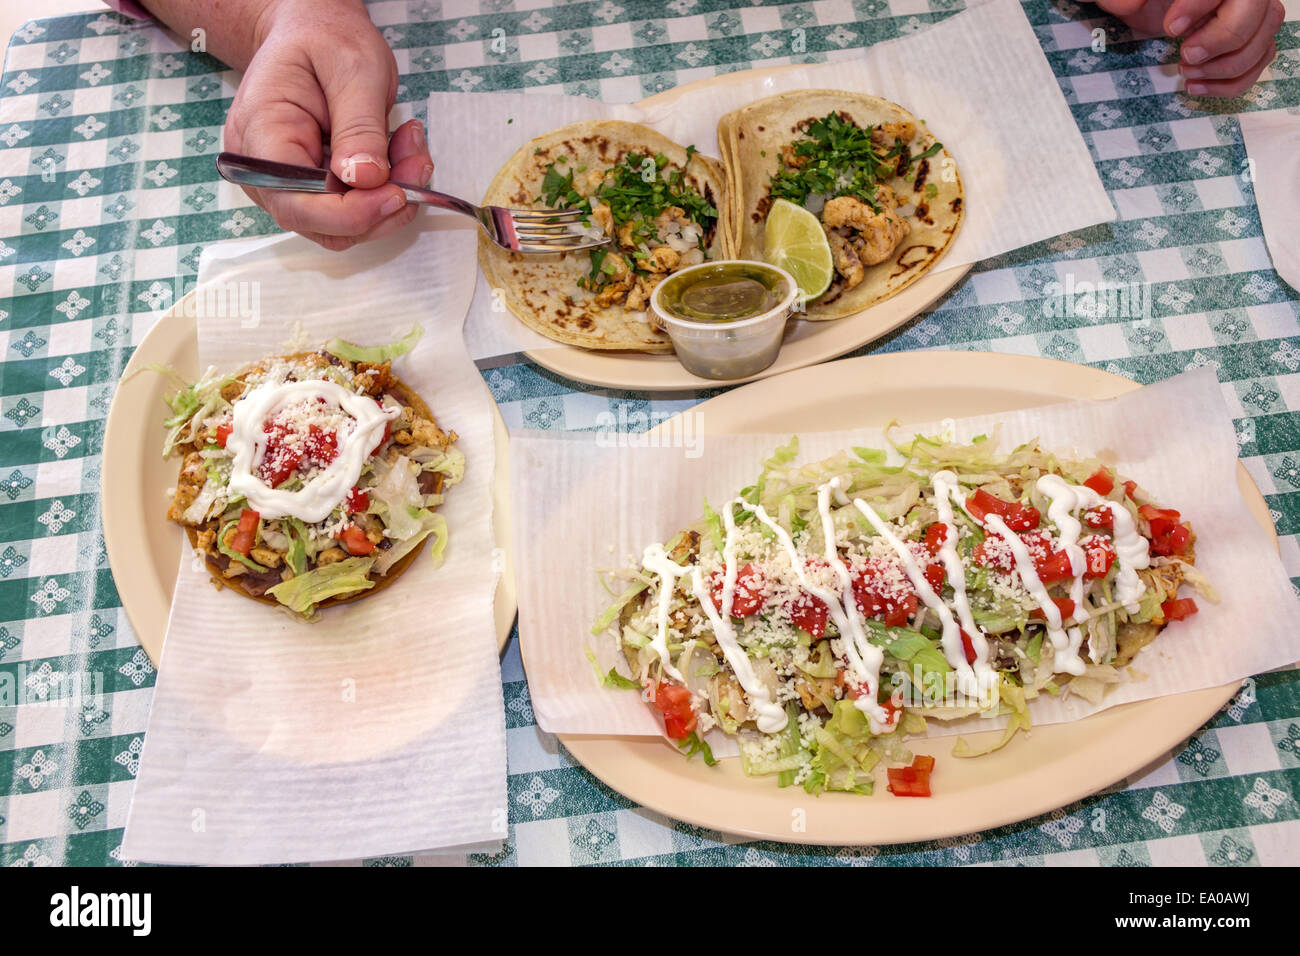 Indiantown Florida,Cafe Los Amigos Mexicana,restaurant restaurants food dining cafe cafes,Mexican,plates,lunch,tacos,tostada,salad,FL140803013 Stock Photo